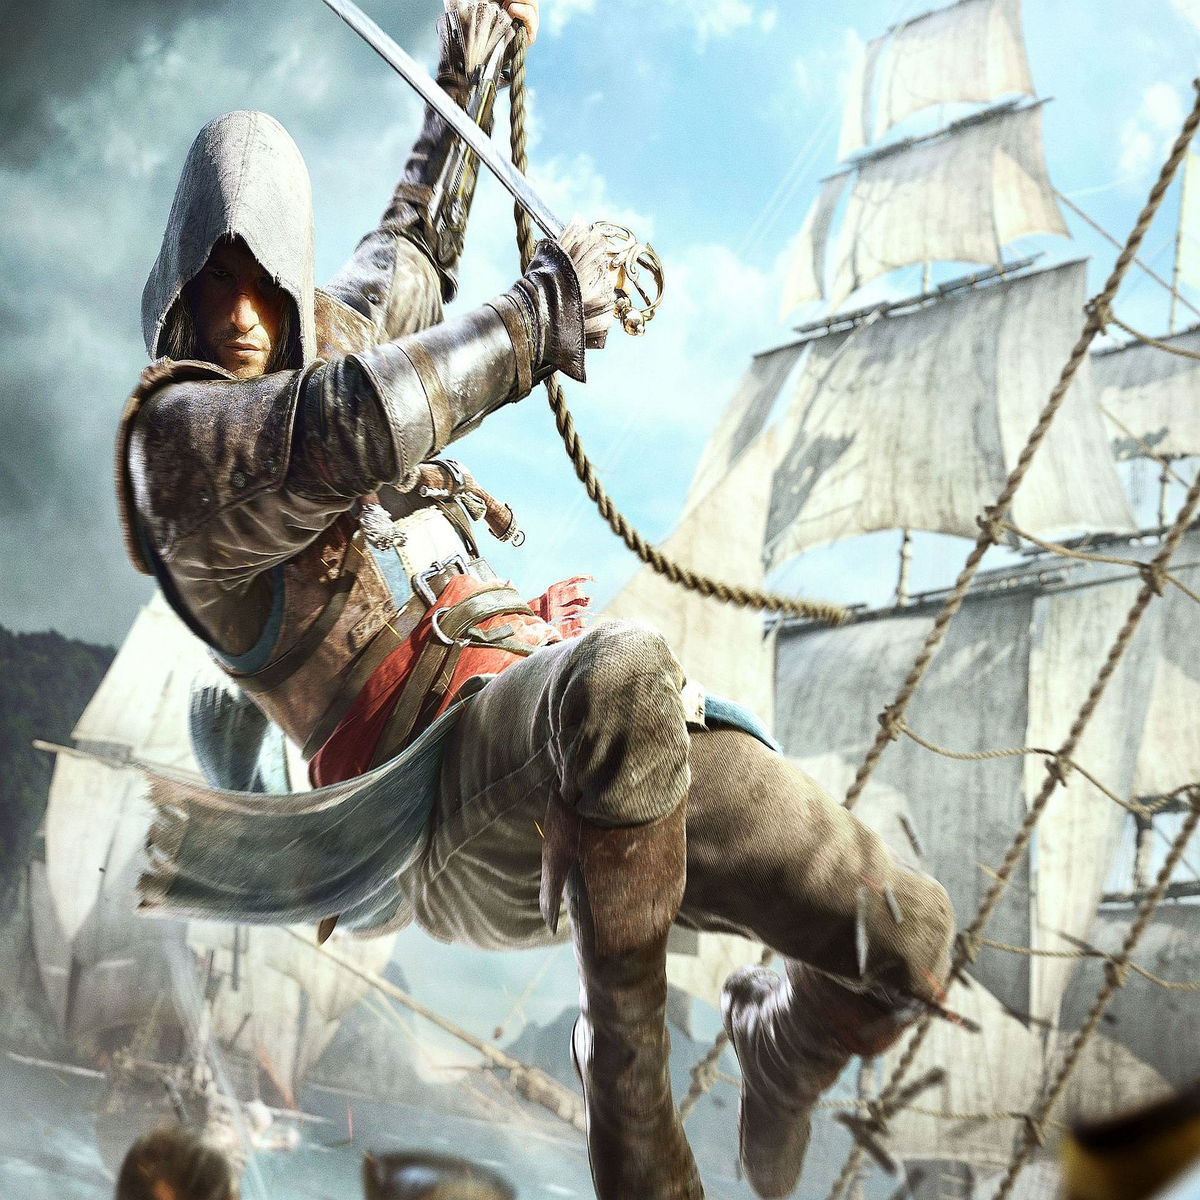 Enjoy playing Assassin's Creed for free this weekend and save big when you  purchase the games